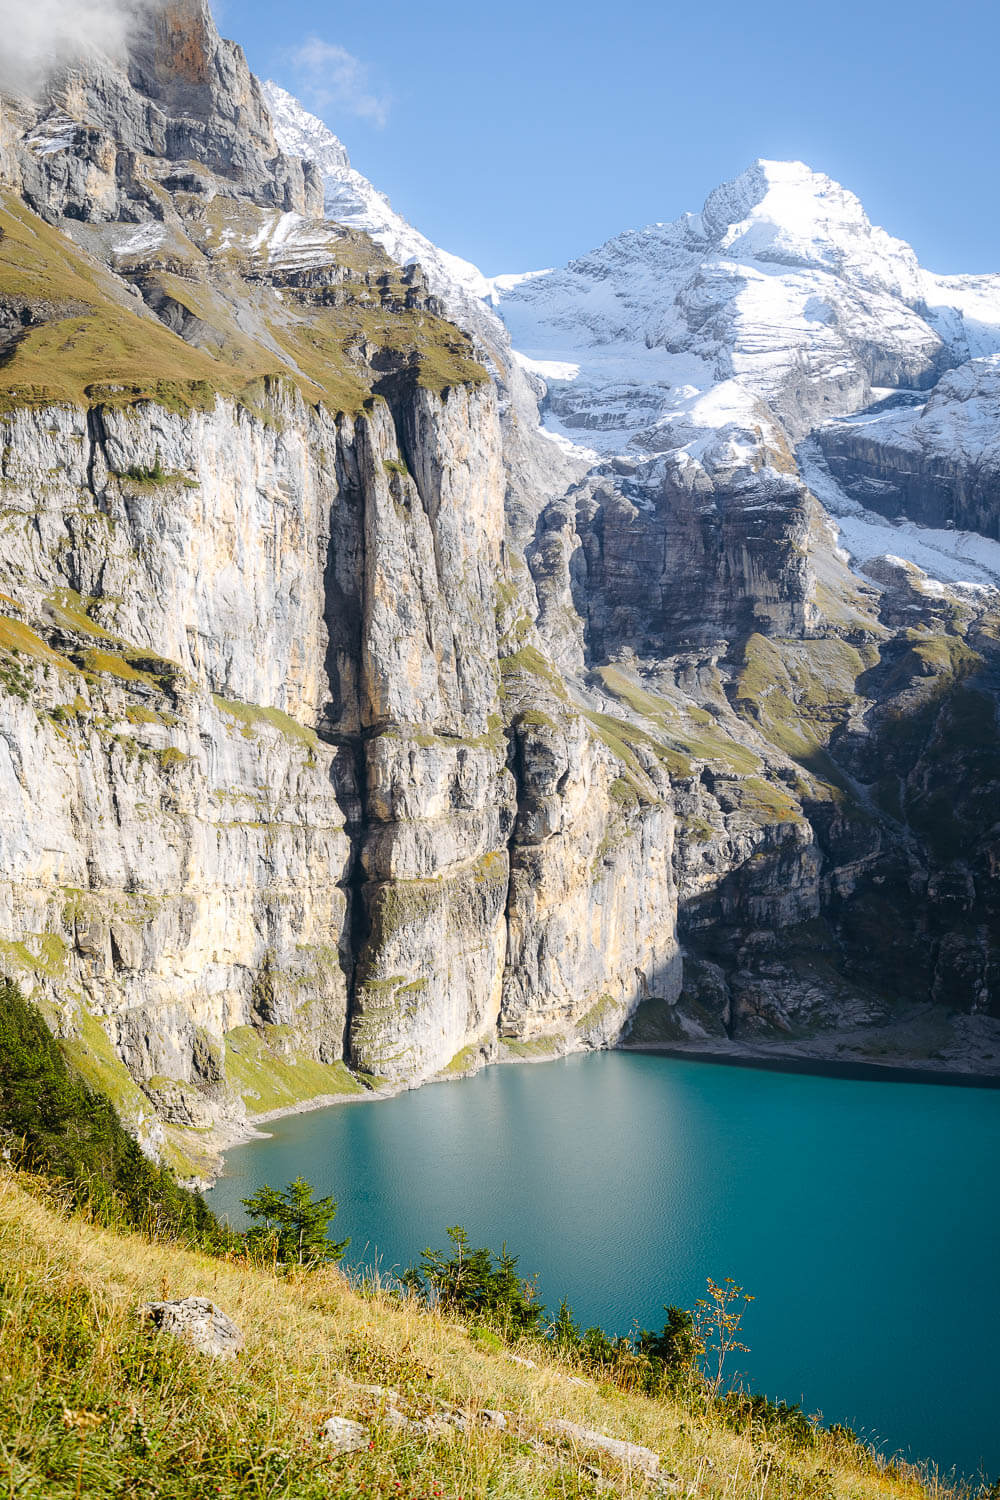 The cliffs surrounding the Oeschinensee lake